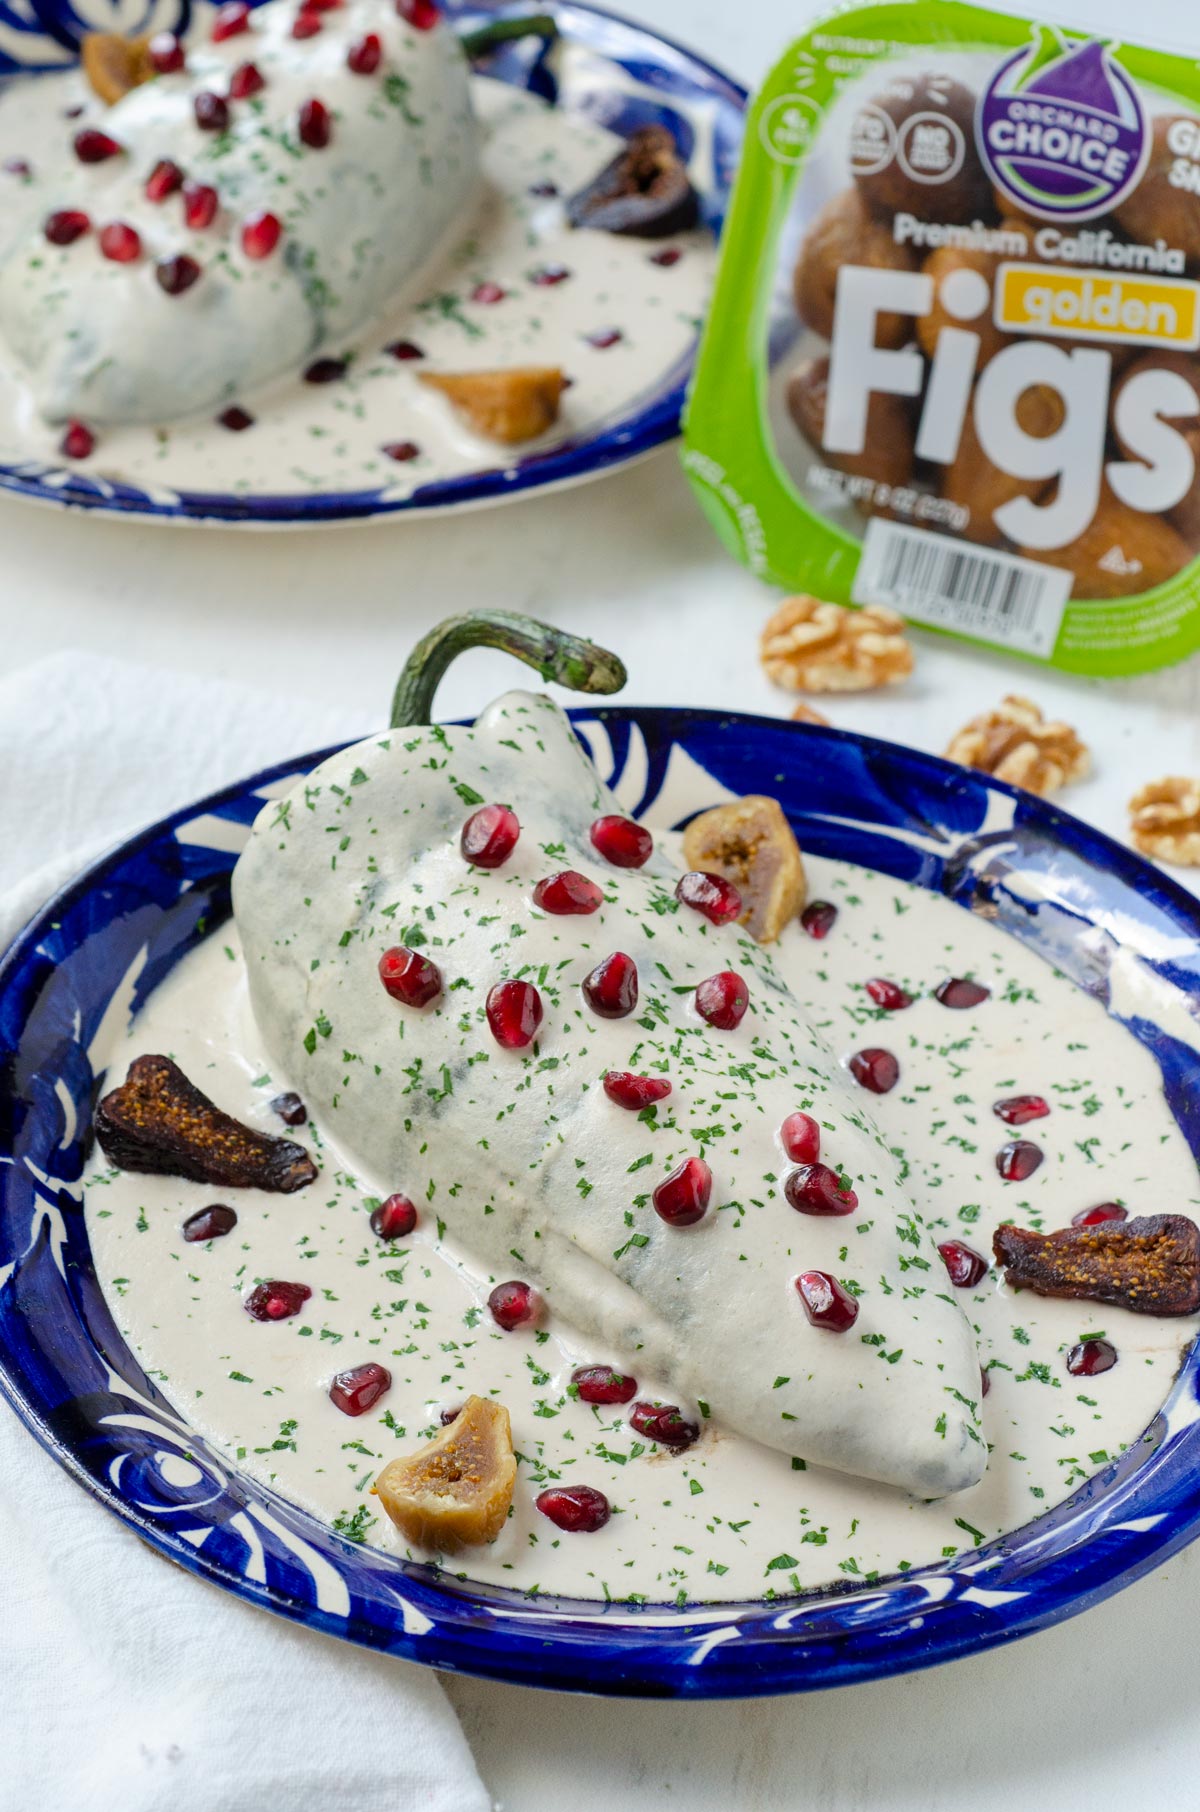 Celebrate Mexican Independence Day. Creamy nut sauce + pomegranate top this vegan chile en nogada recipe filled with figs, nuts + fruits.